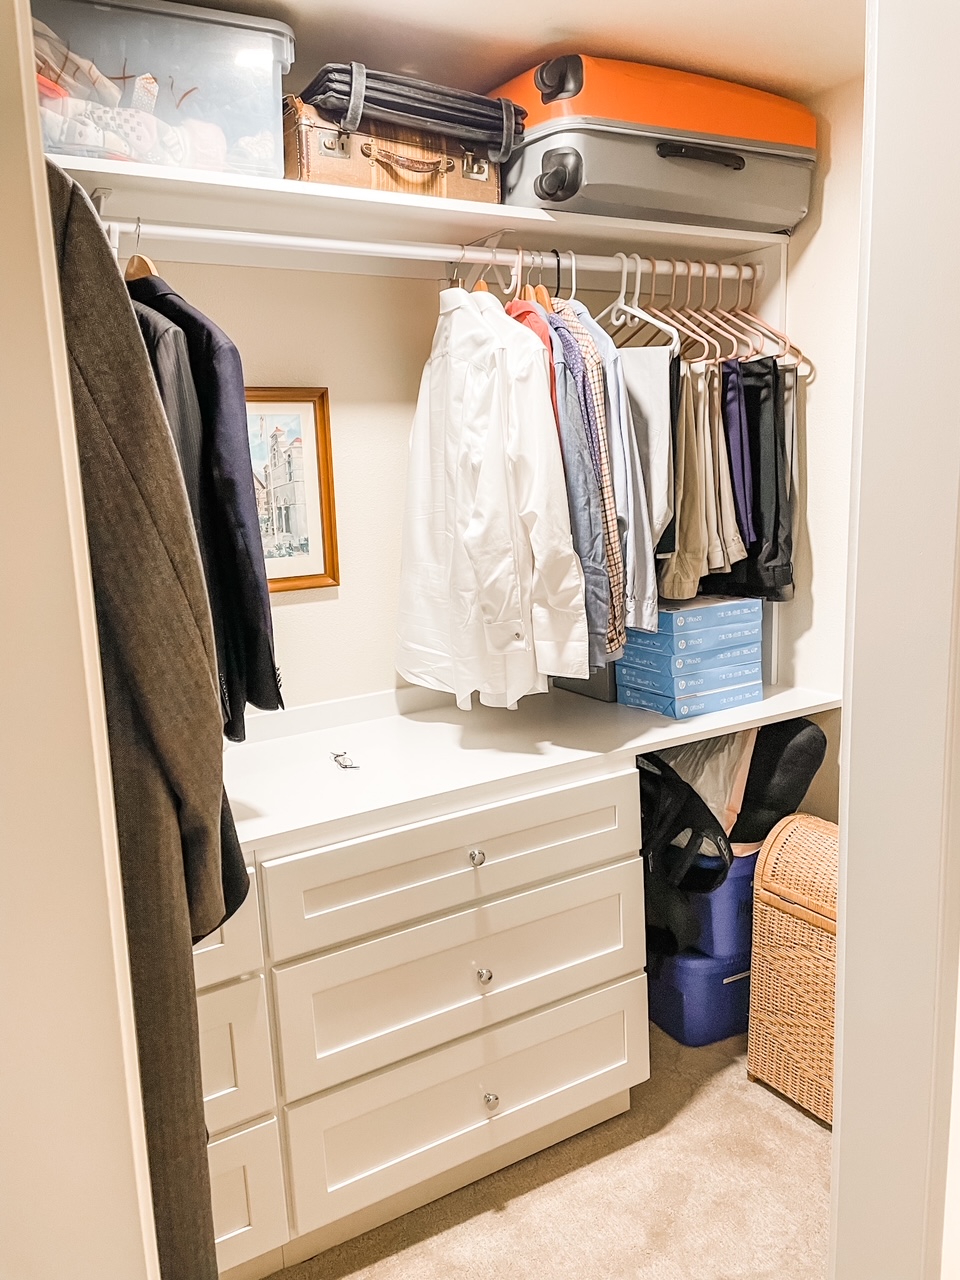 The closet with drawers under the rack